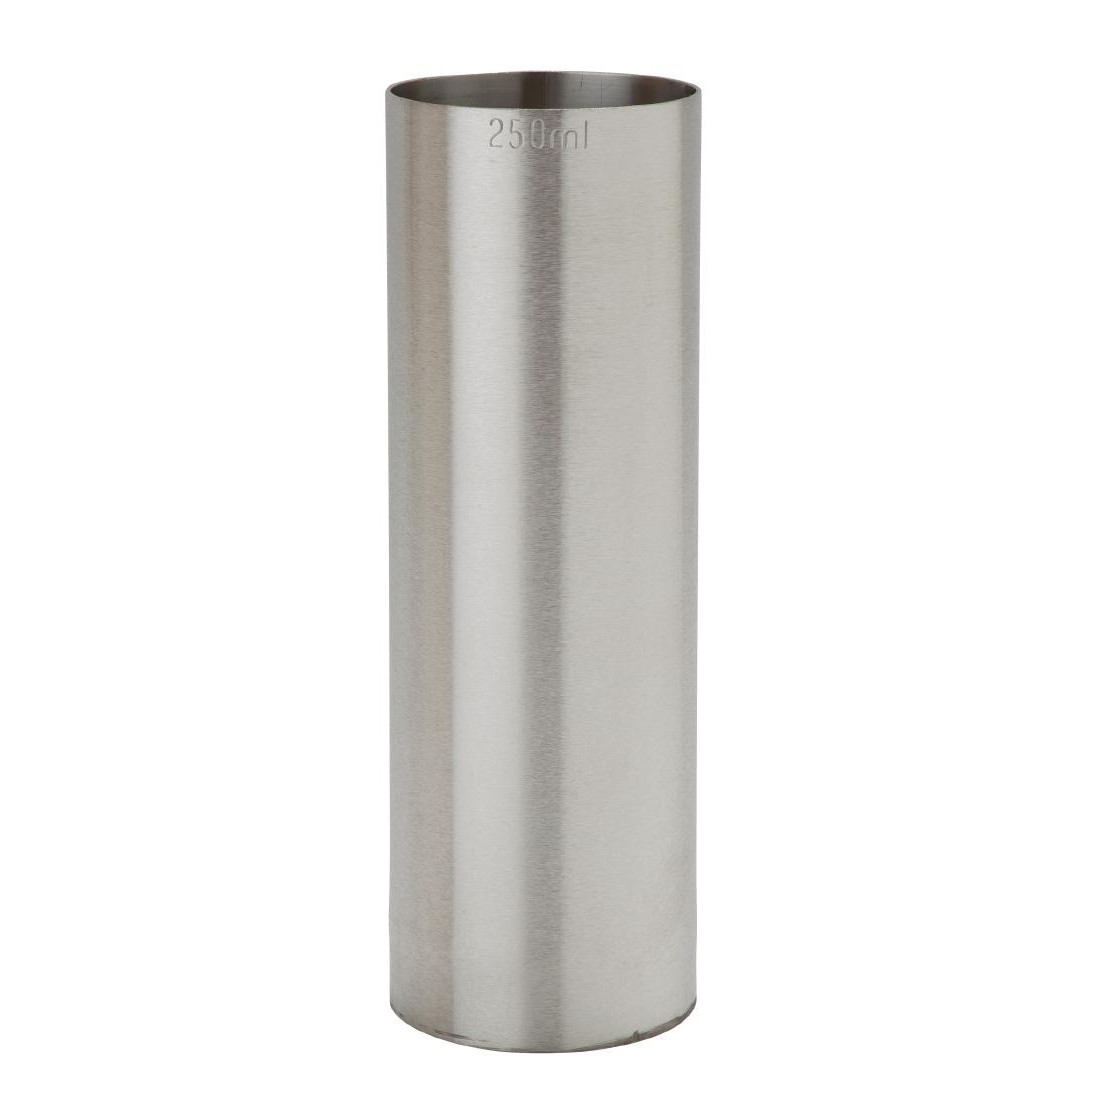 Stainless Steel Thimble Measure CE 250ml 